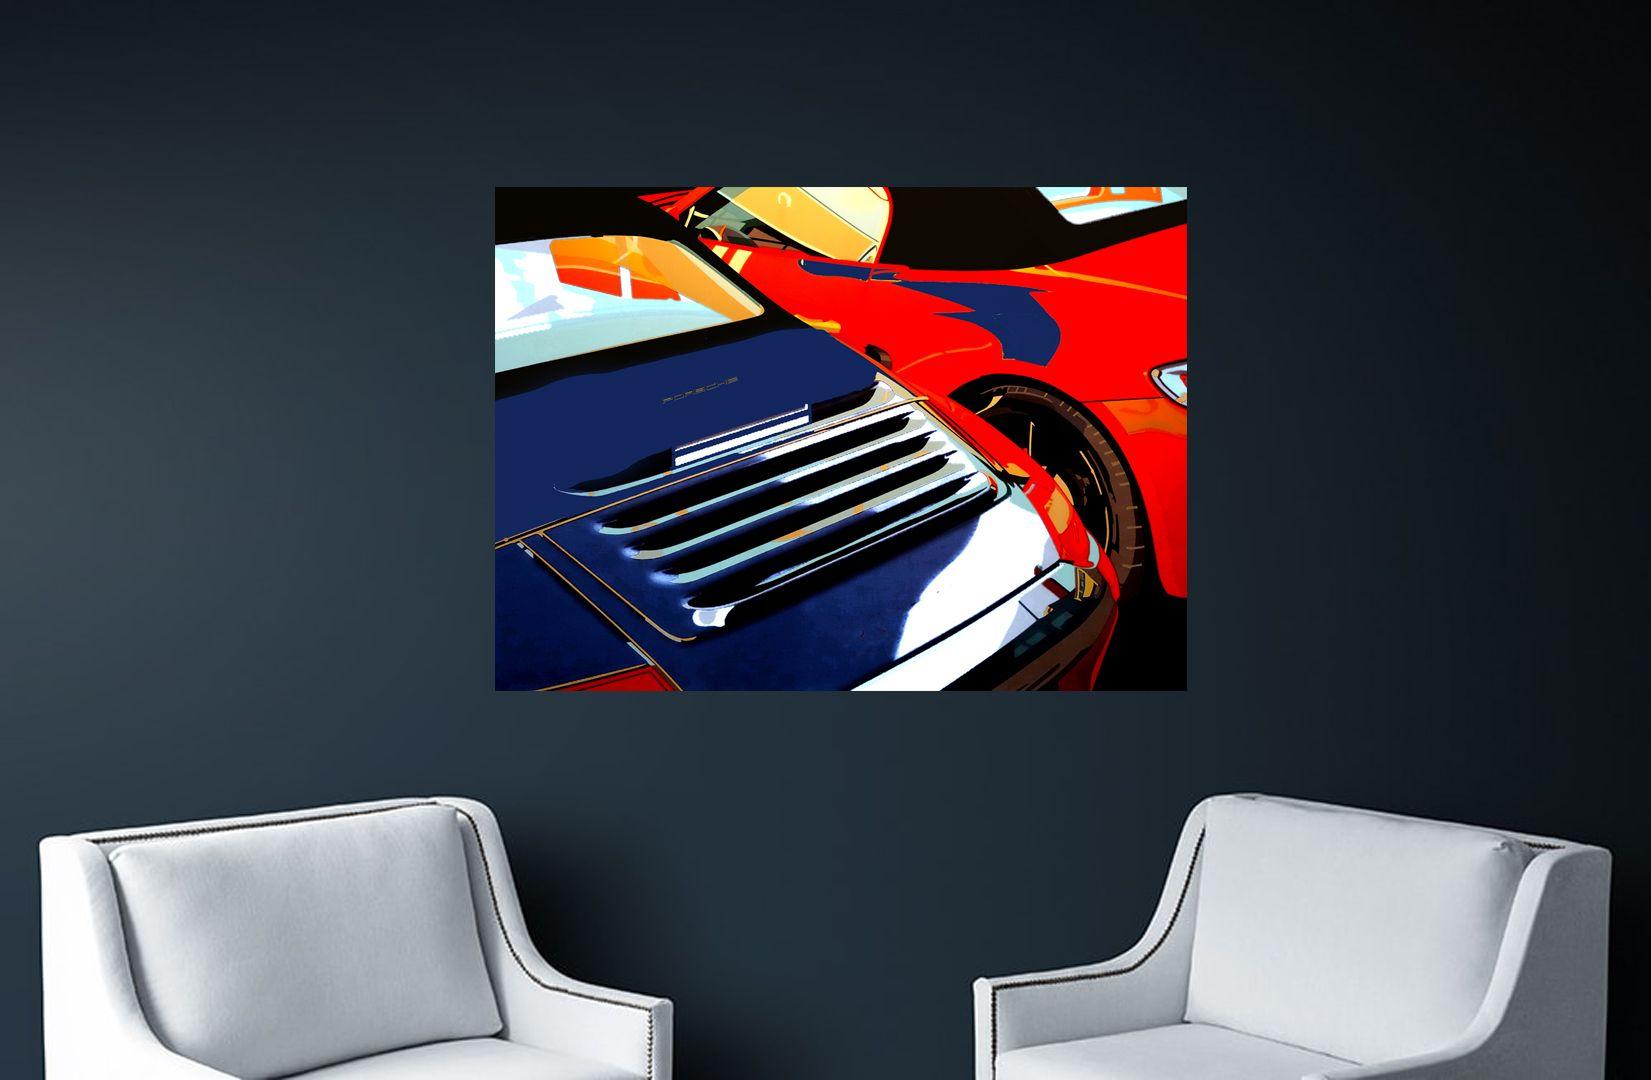 Digitally remastered composition of two sport cars by applying the CMPB technique - C-print on Alu-Dibond behind acrylic glass with silver ArtBox frame - museum quality - other sizes upon request - ready to hang - Limited edition of 10 only ::